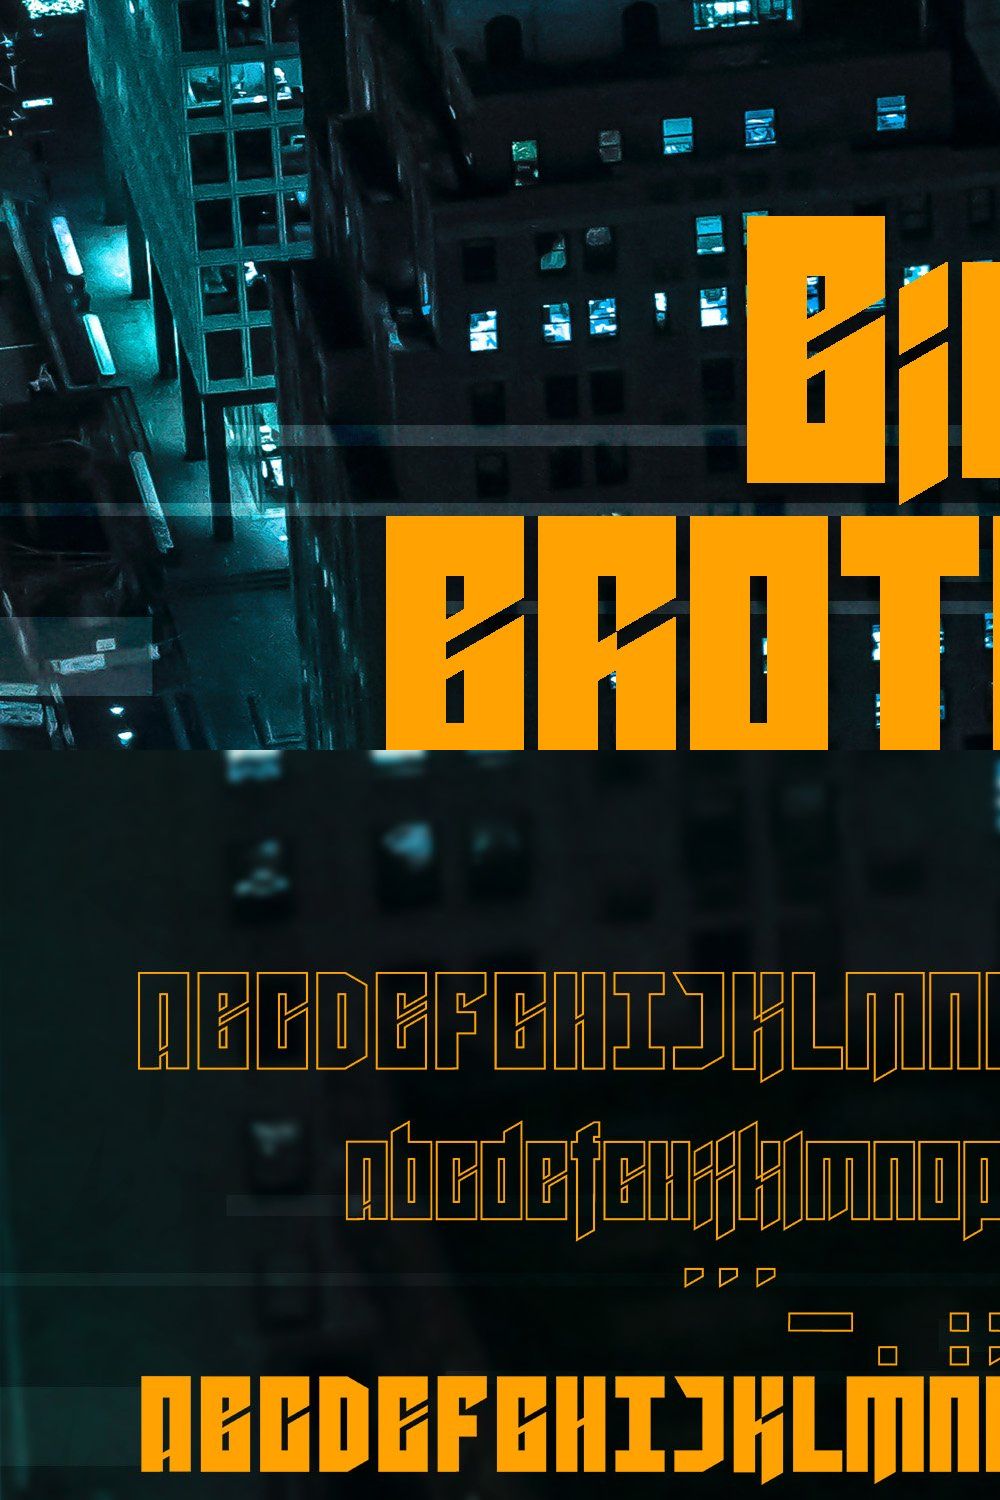 Bigbrother neo gothic font. V 0.2 pinterest preview image.